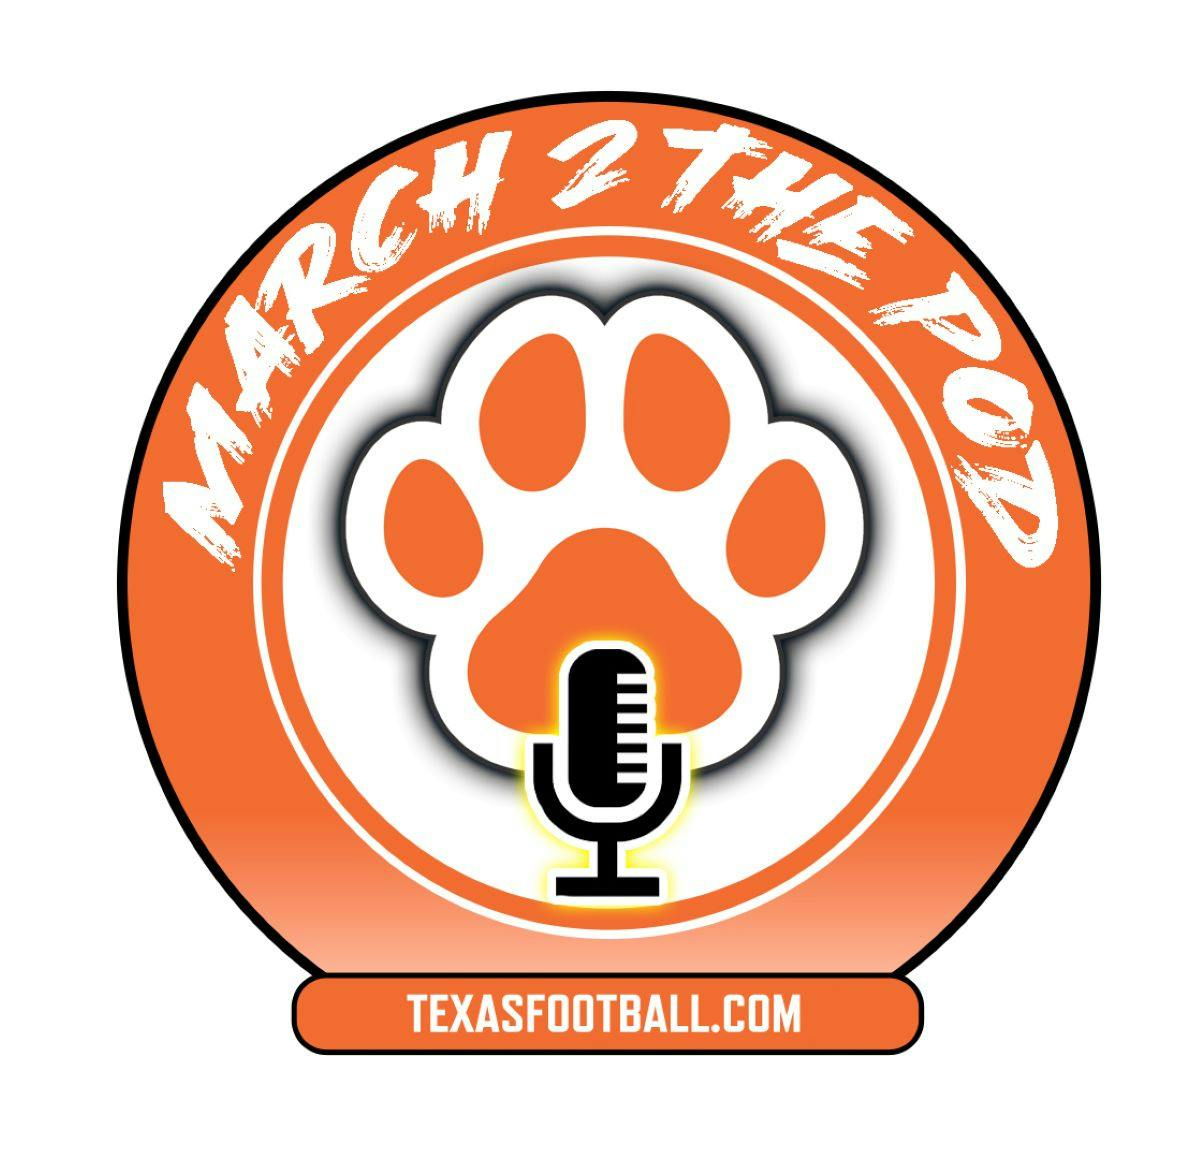 MARCH 2 THE POD: Baseball secures a spot in CUSA tournament